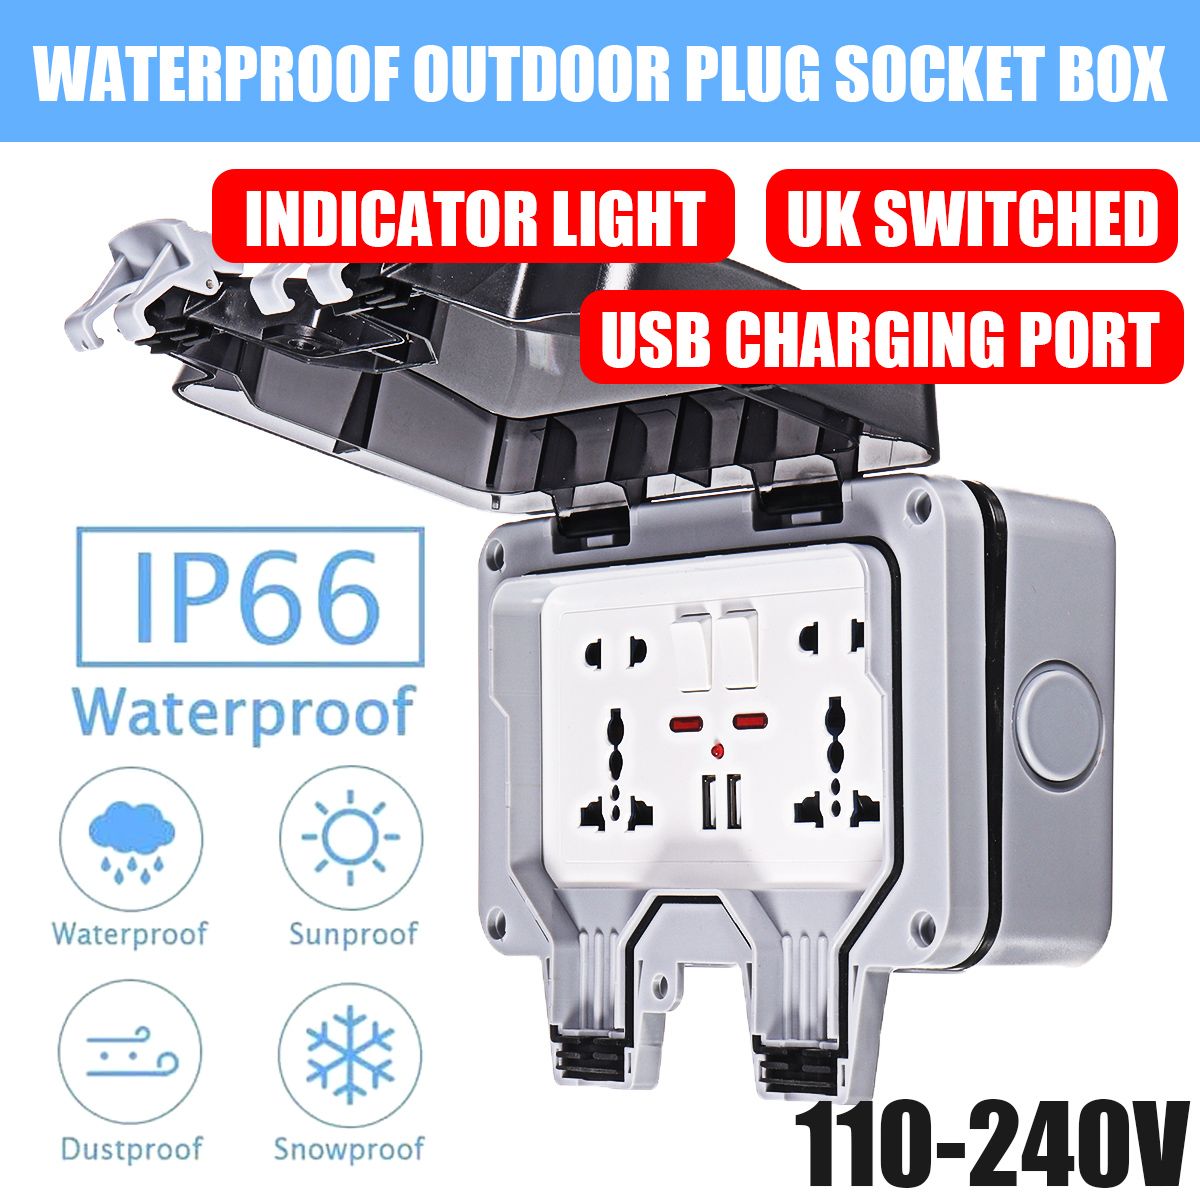 IP66-Weatherproof-Outdoor-BOX-Wall-Socket-13A-Double-Universal--UK-Switched-Outlet-With-USB-Charging-1744927